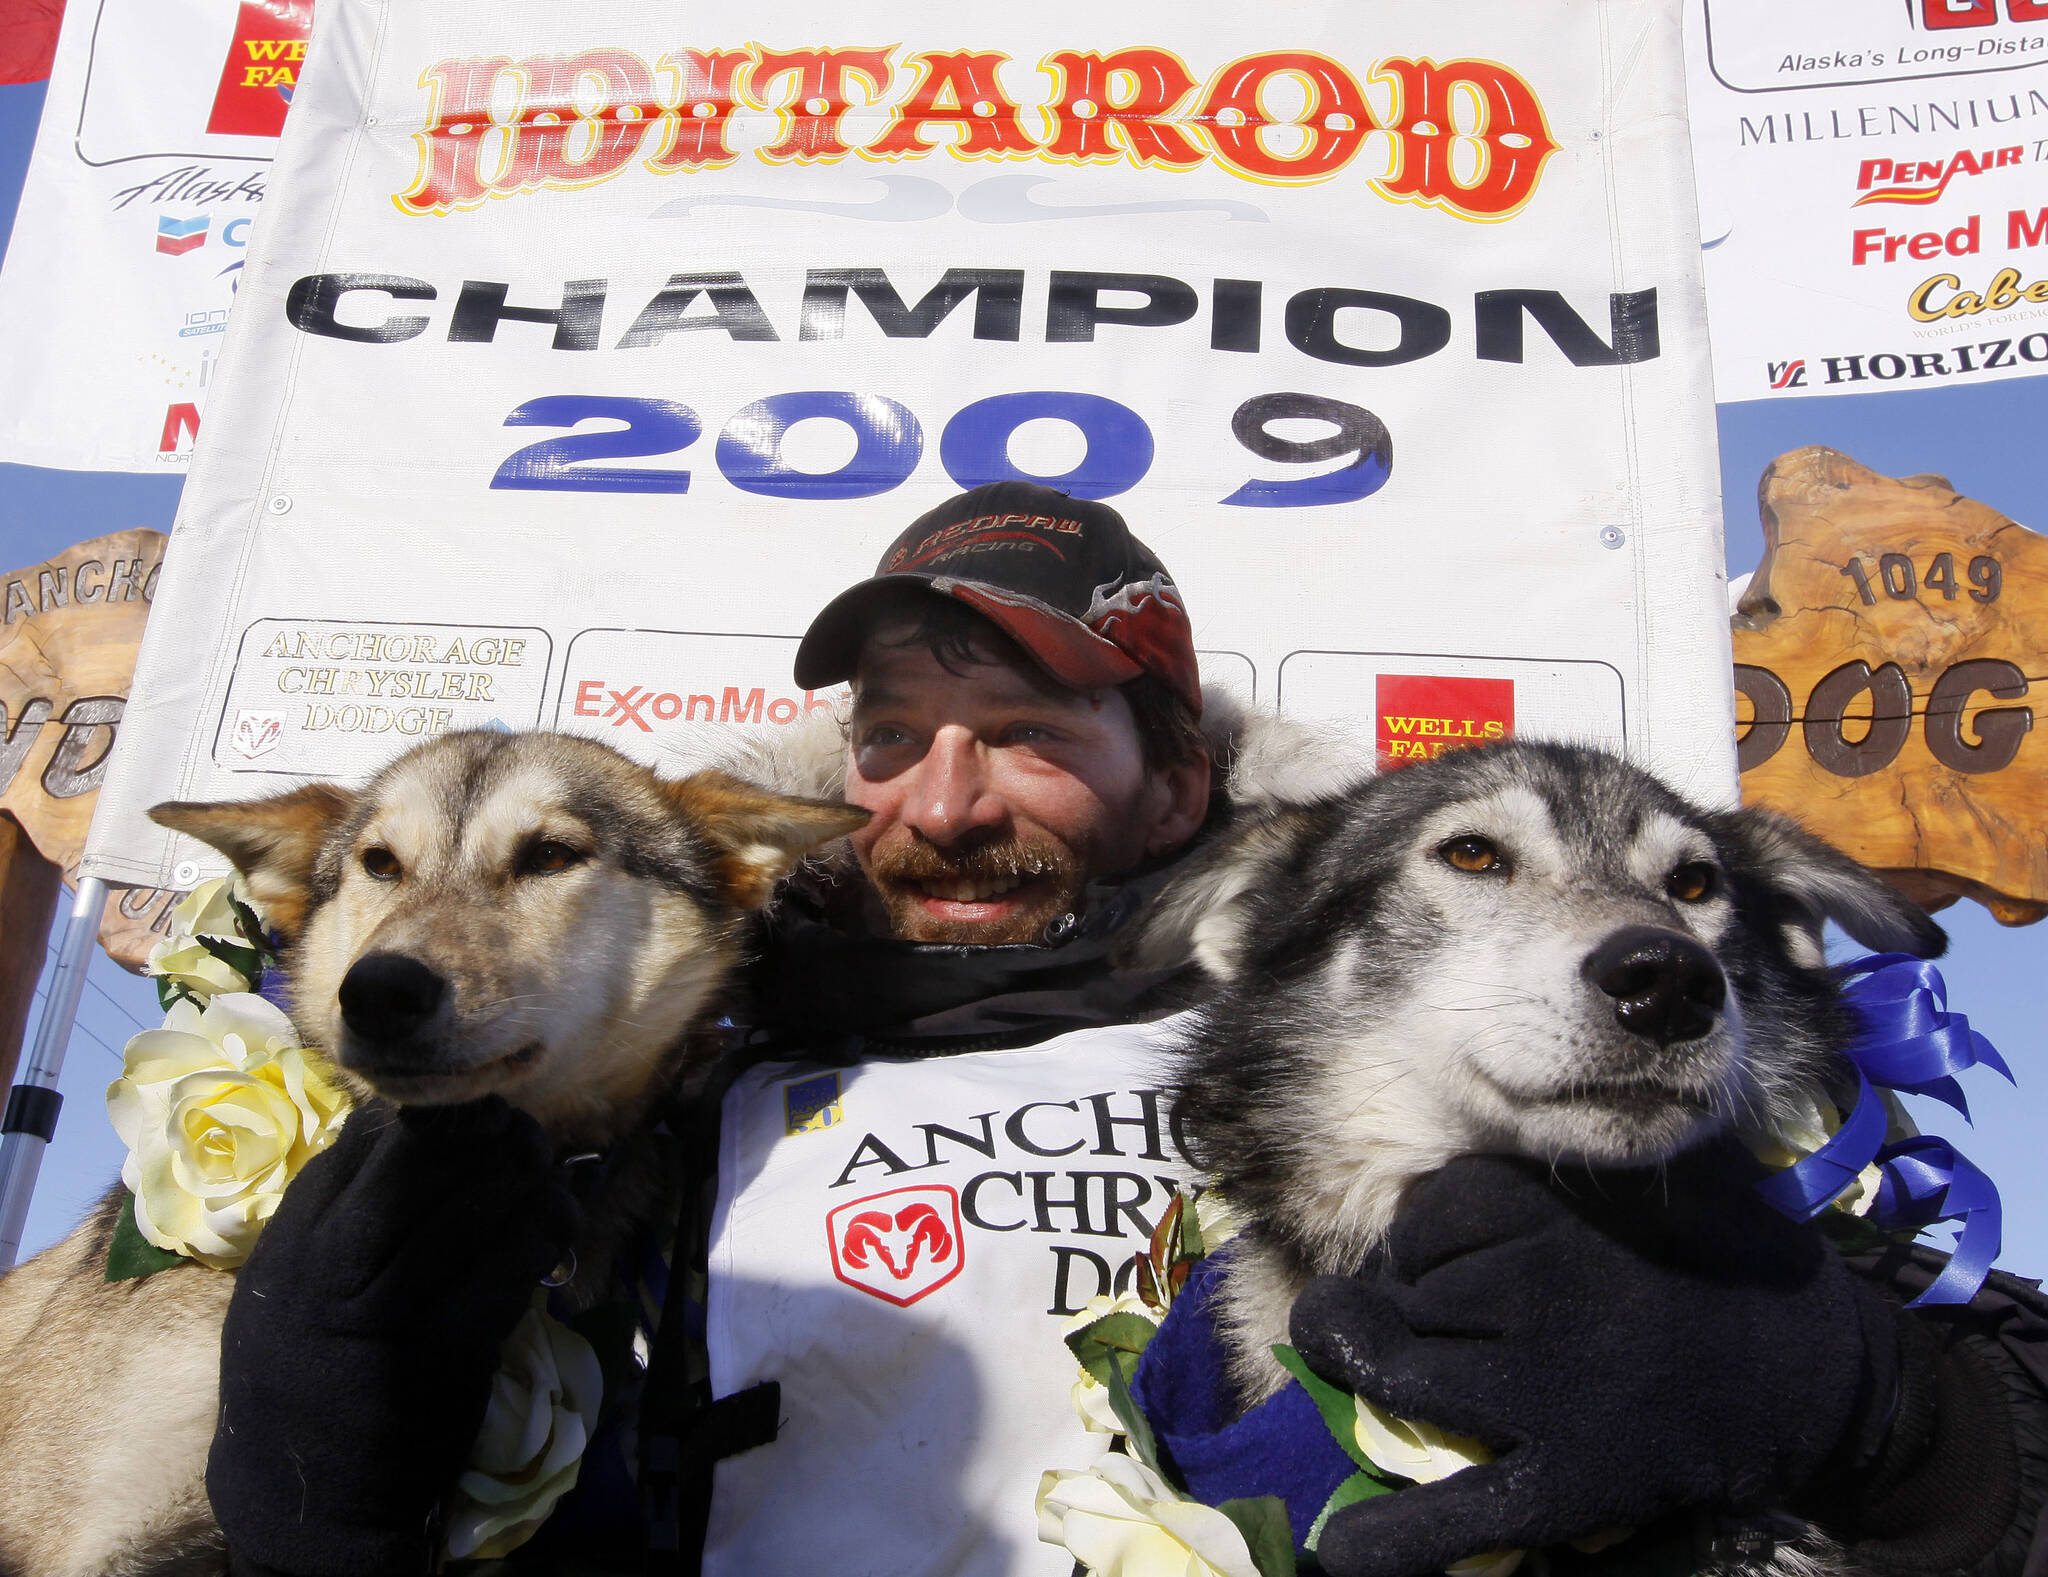 Lance Mackey sits with his lead dogs Larry, right, and Maple after crossing the finish line of the Iditarod Trail Sled Dog Race on March 18, 2009, in Nome, Alaska, to win his third Iditarod in a row. Mackey, a four-time Iditarod Trail Sled Dog Race winner and one of mushing’s most colorful and accomplished champions who also suffered from health and drug issues, died Wednesday, Sept. 7, 2022, his father and kennel announced on Facebook. He was 52. (AP Photo/Al Grillo, File)